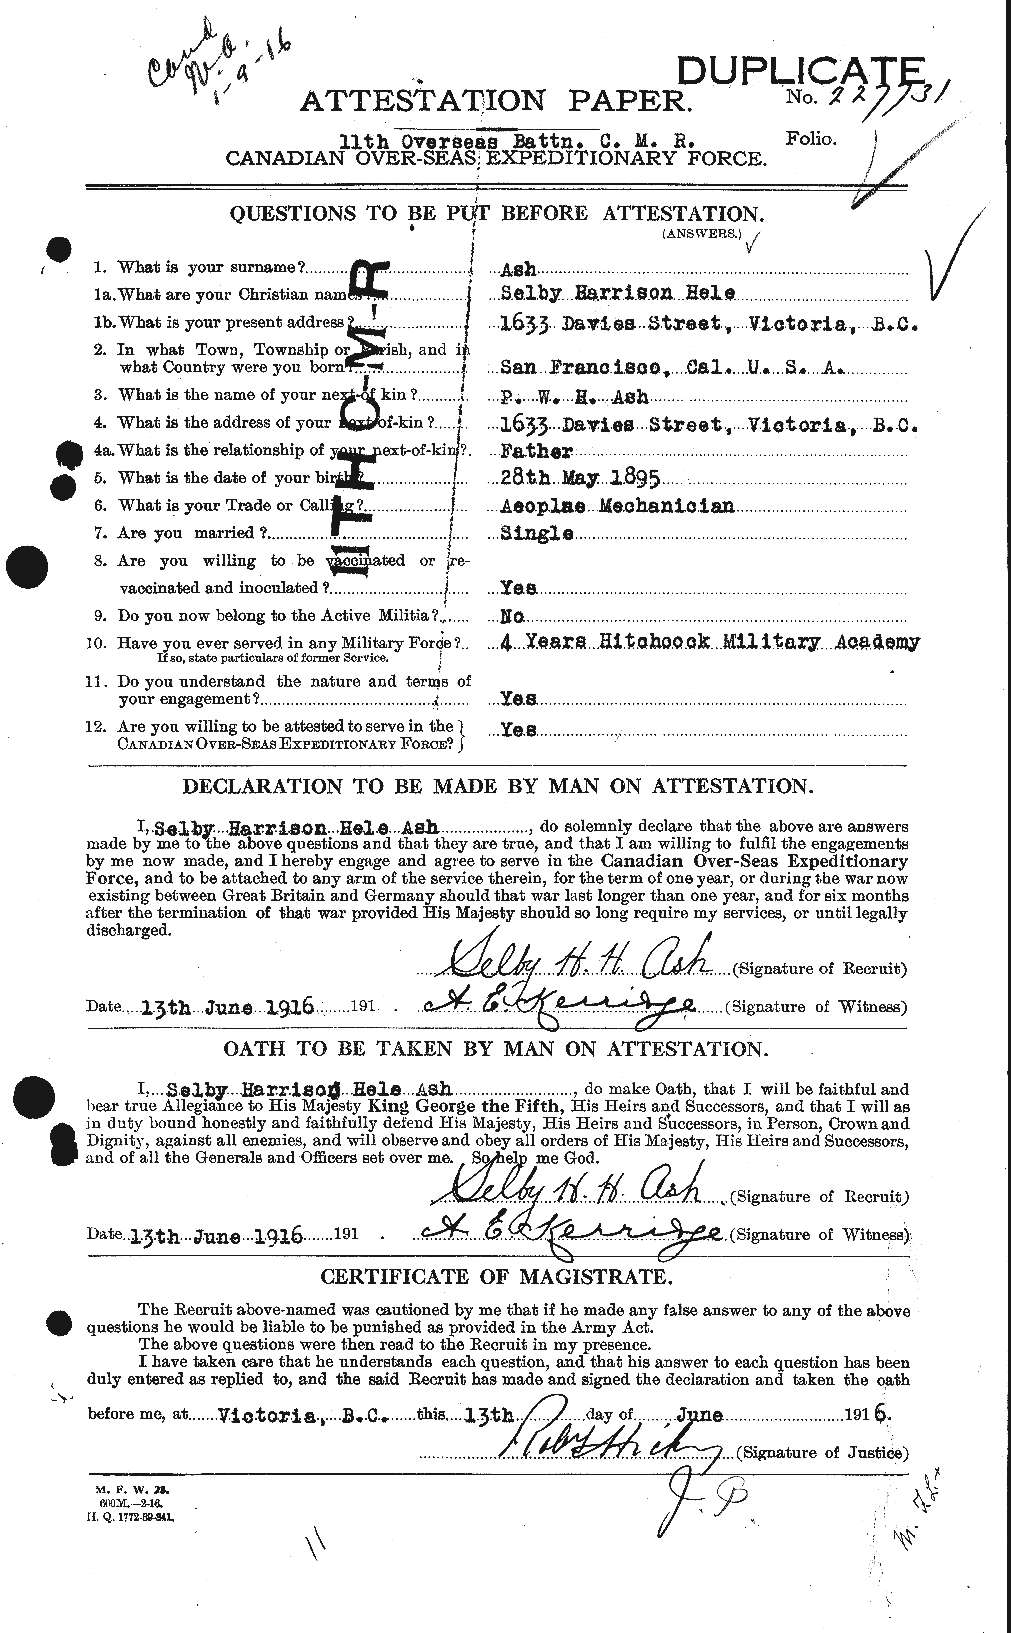 Personnel Records of the First World War - CEF 214590a